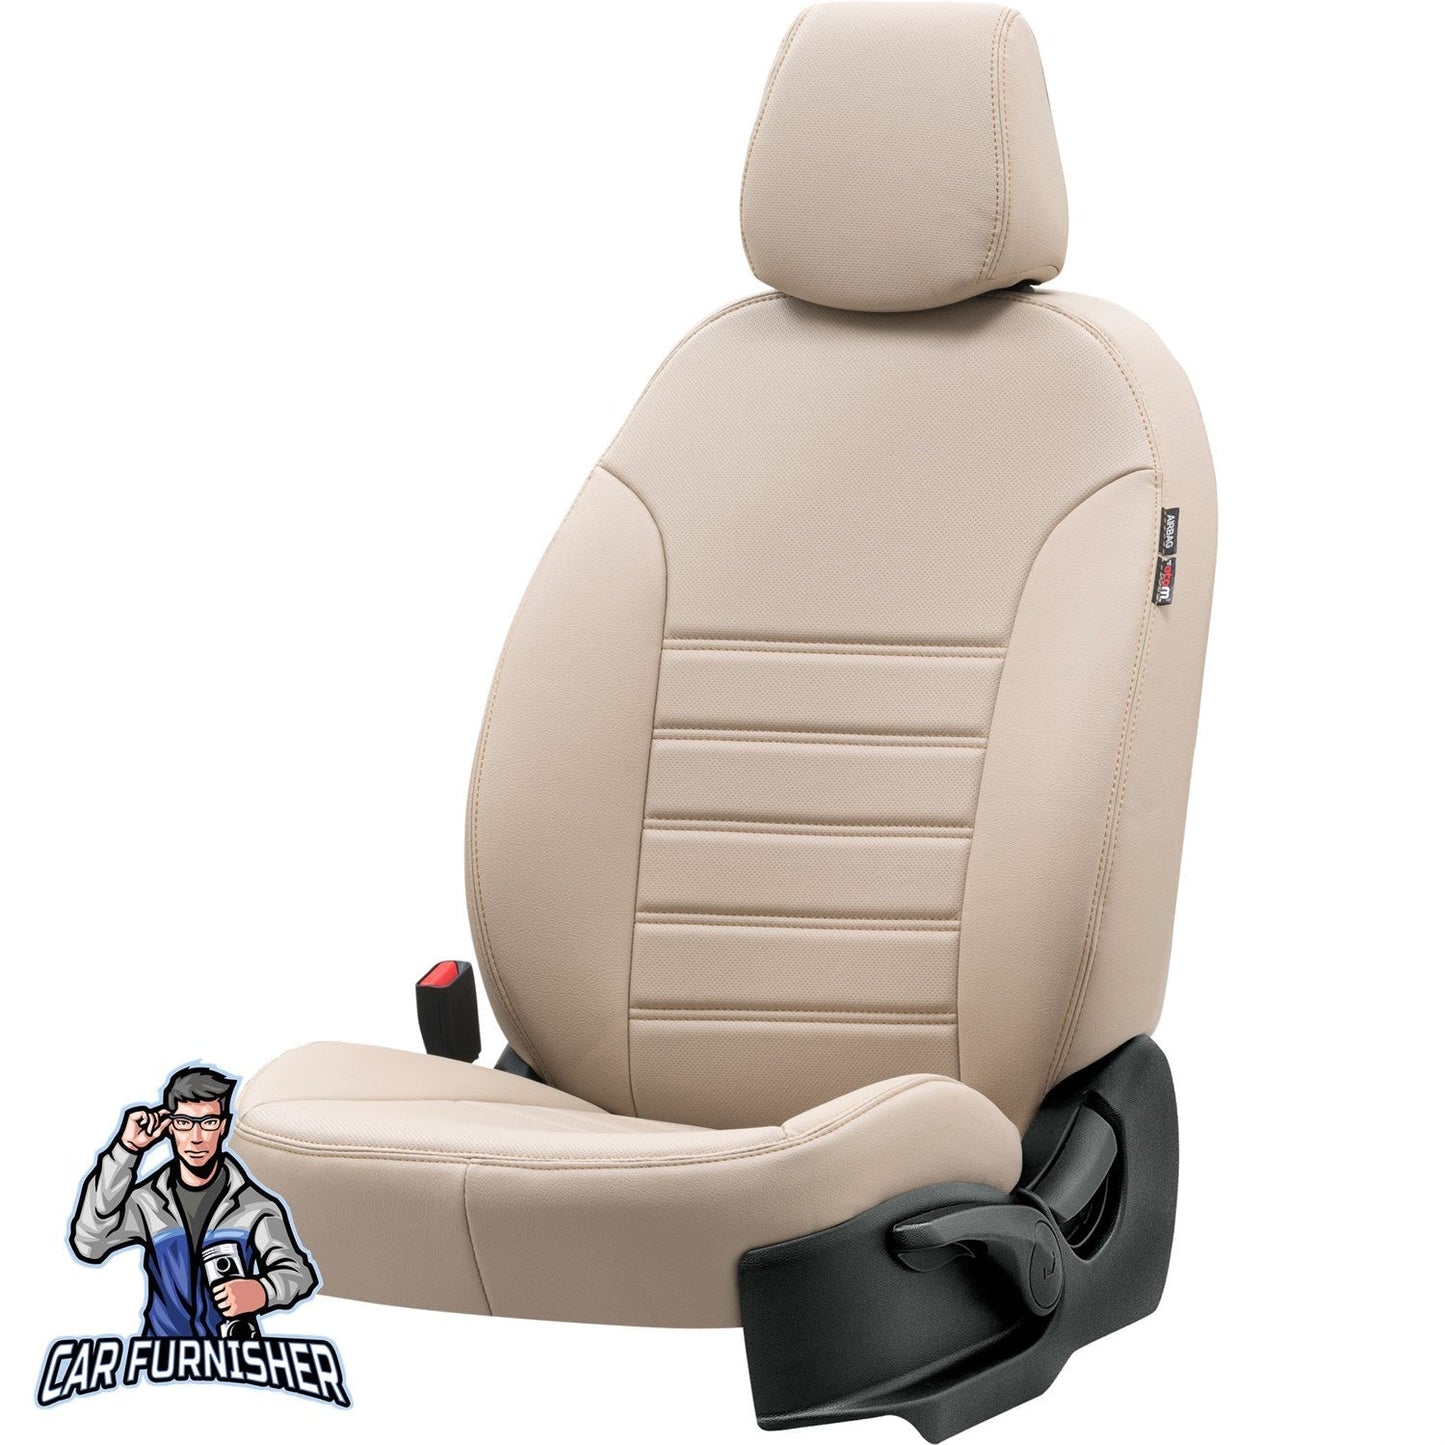 Peugeot Partner Tepee Seat Covers Istanbul Leather Design Beige Leather